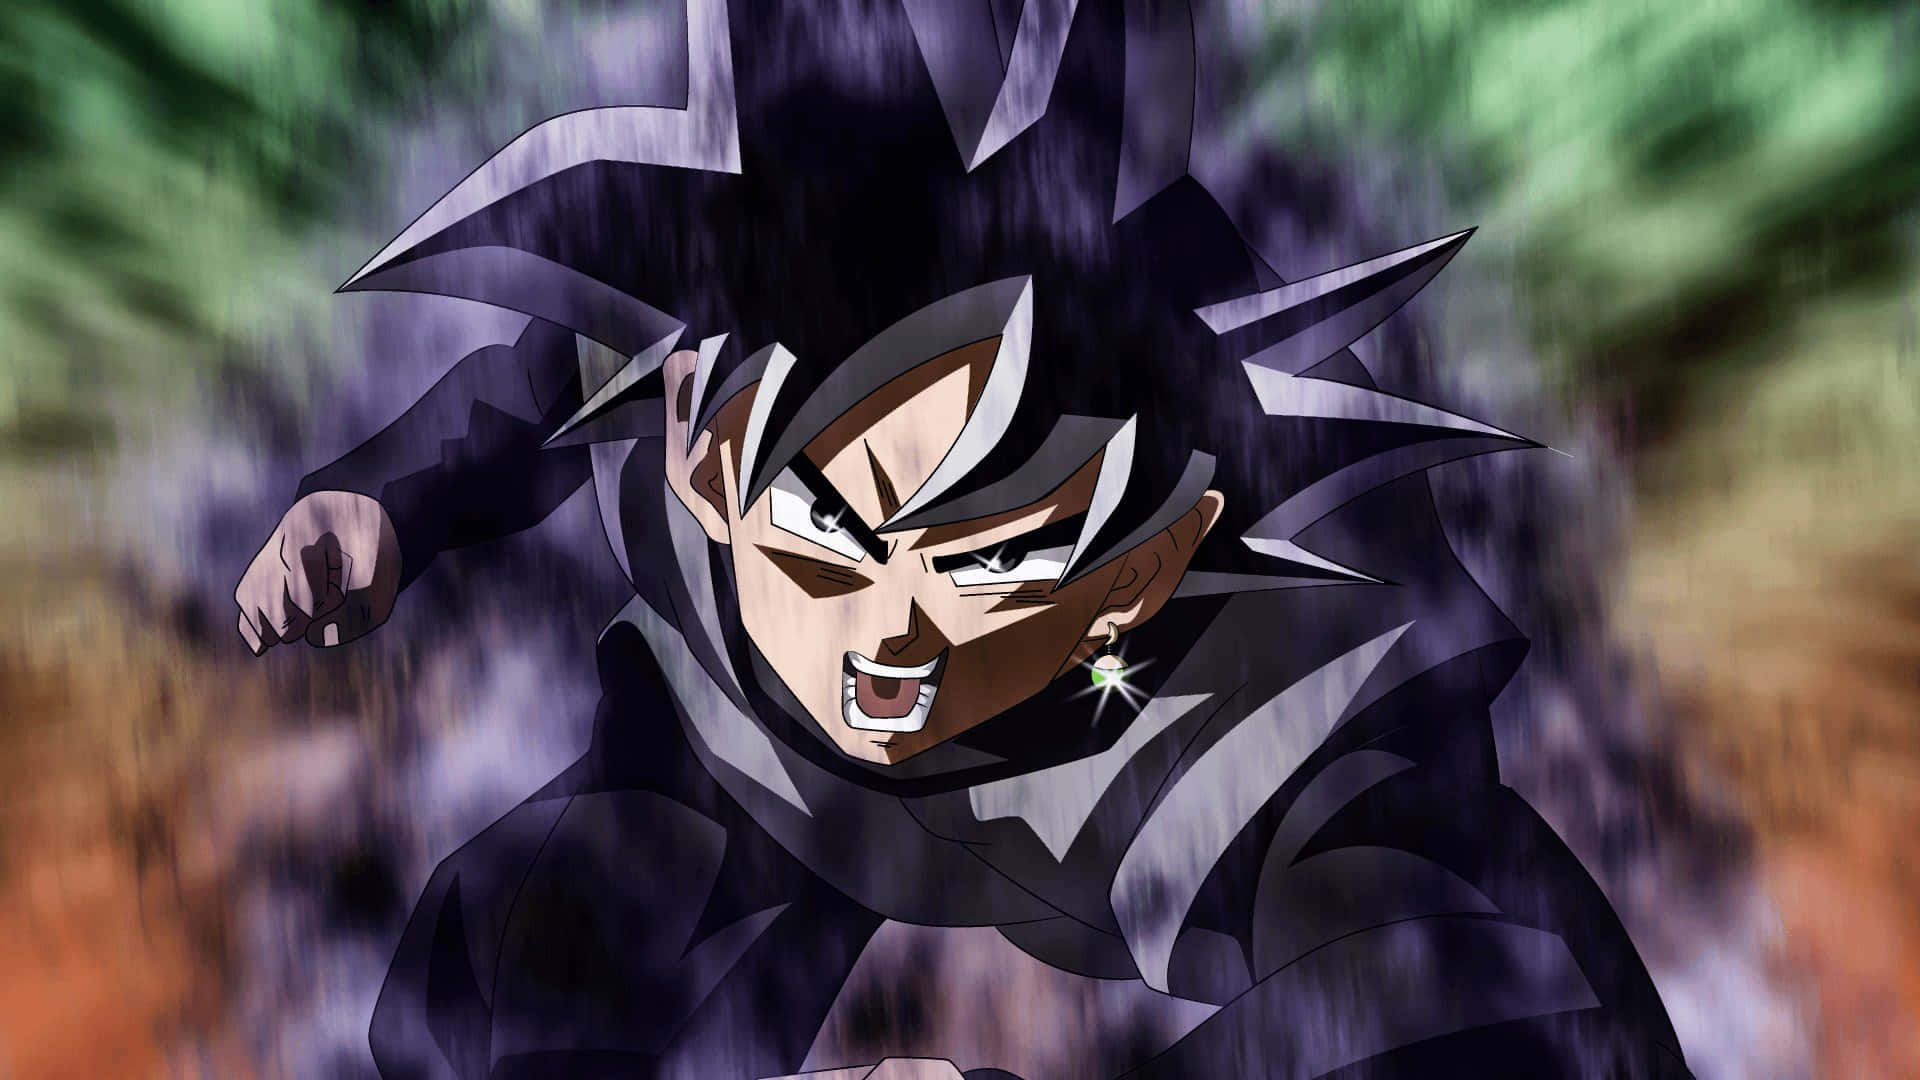 Son Goku Black Looks Aggressive And Determined